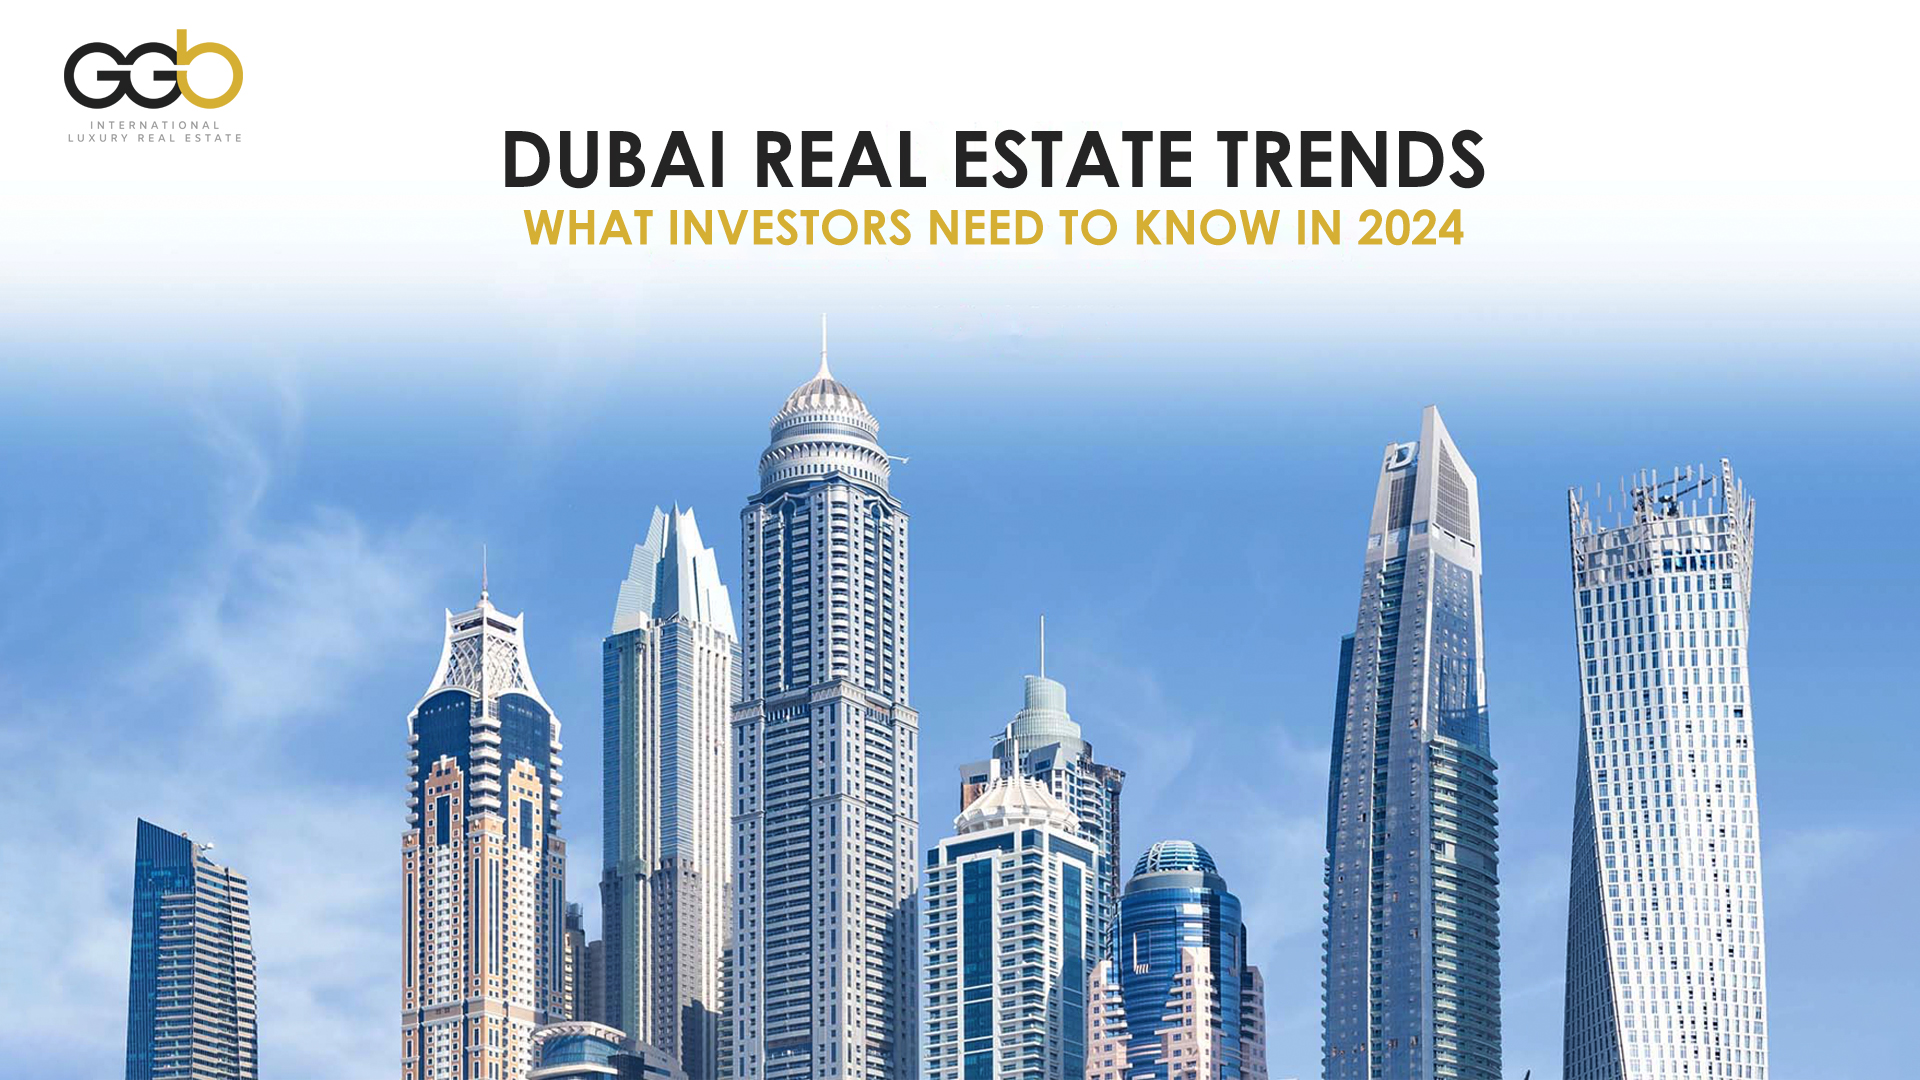 Dubai’s Ambitious 2033 Quality of Life Strategy: A Golden Opportunity for Global Real Estate Investors